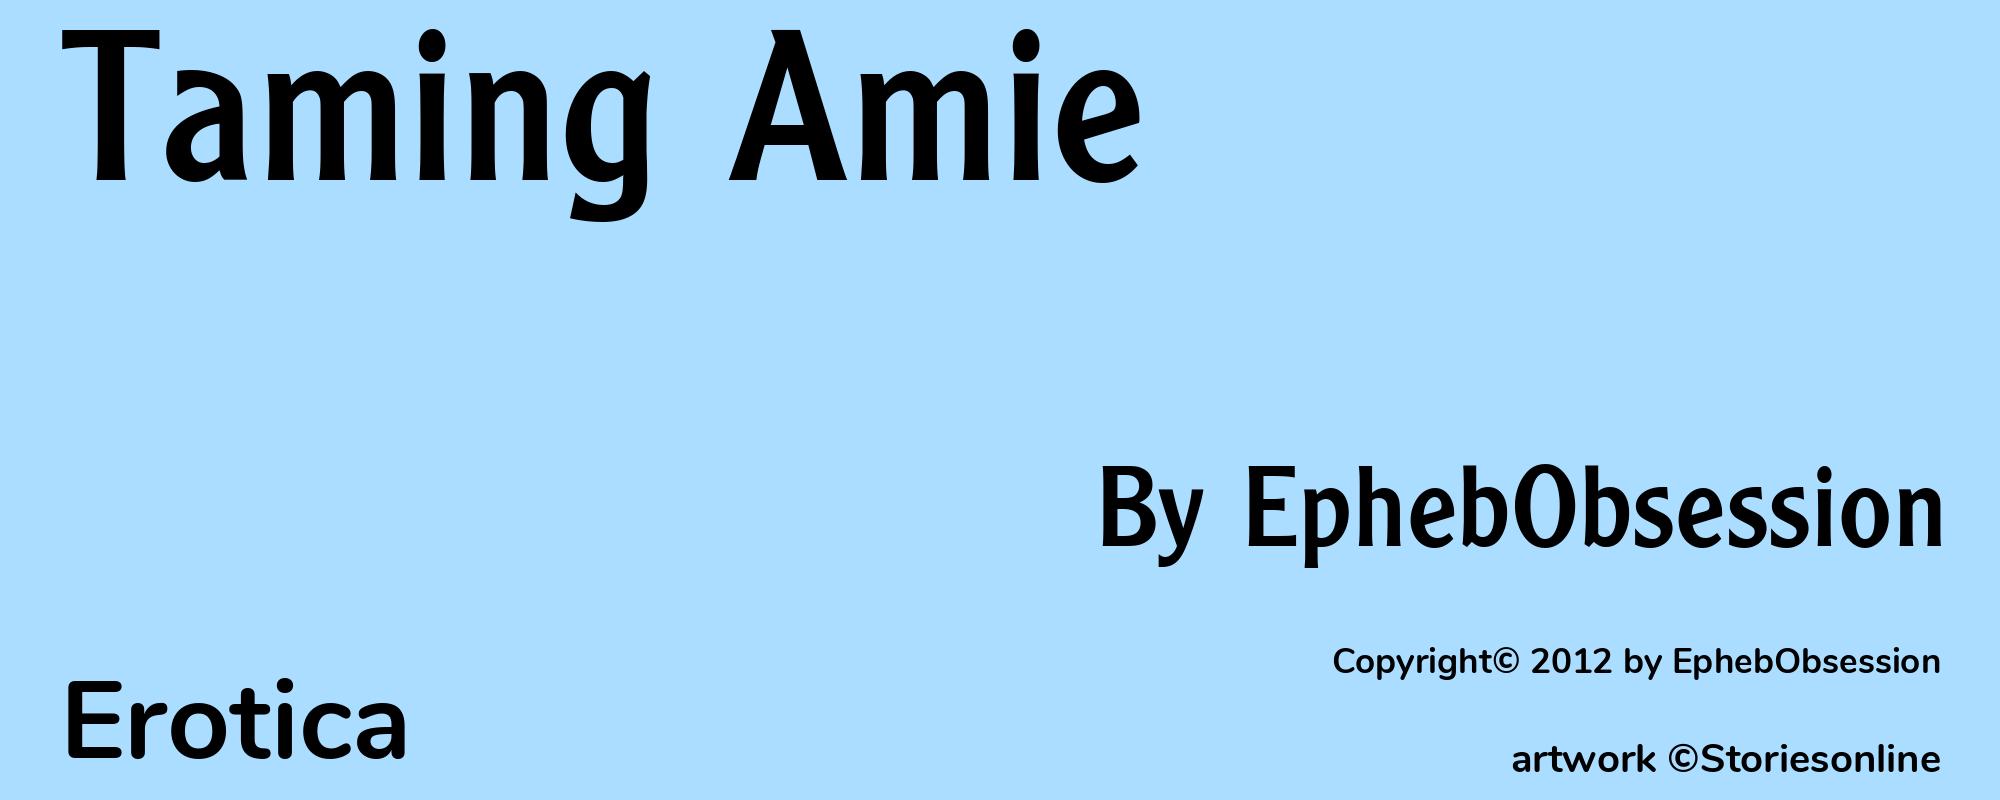 Taming Amie - Cover